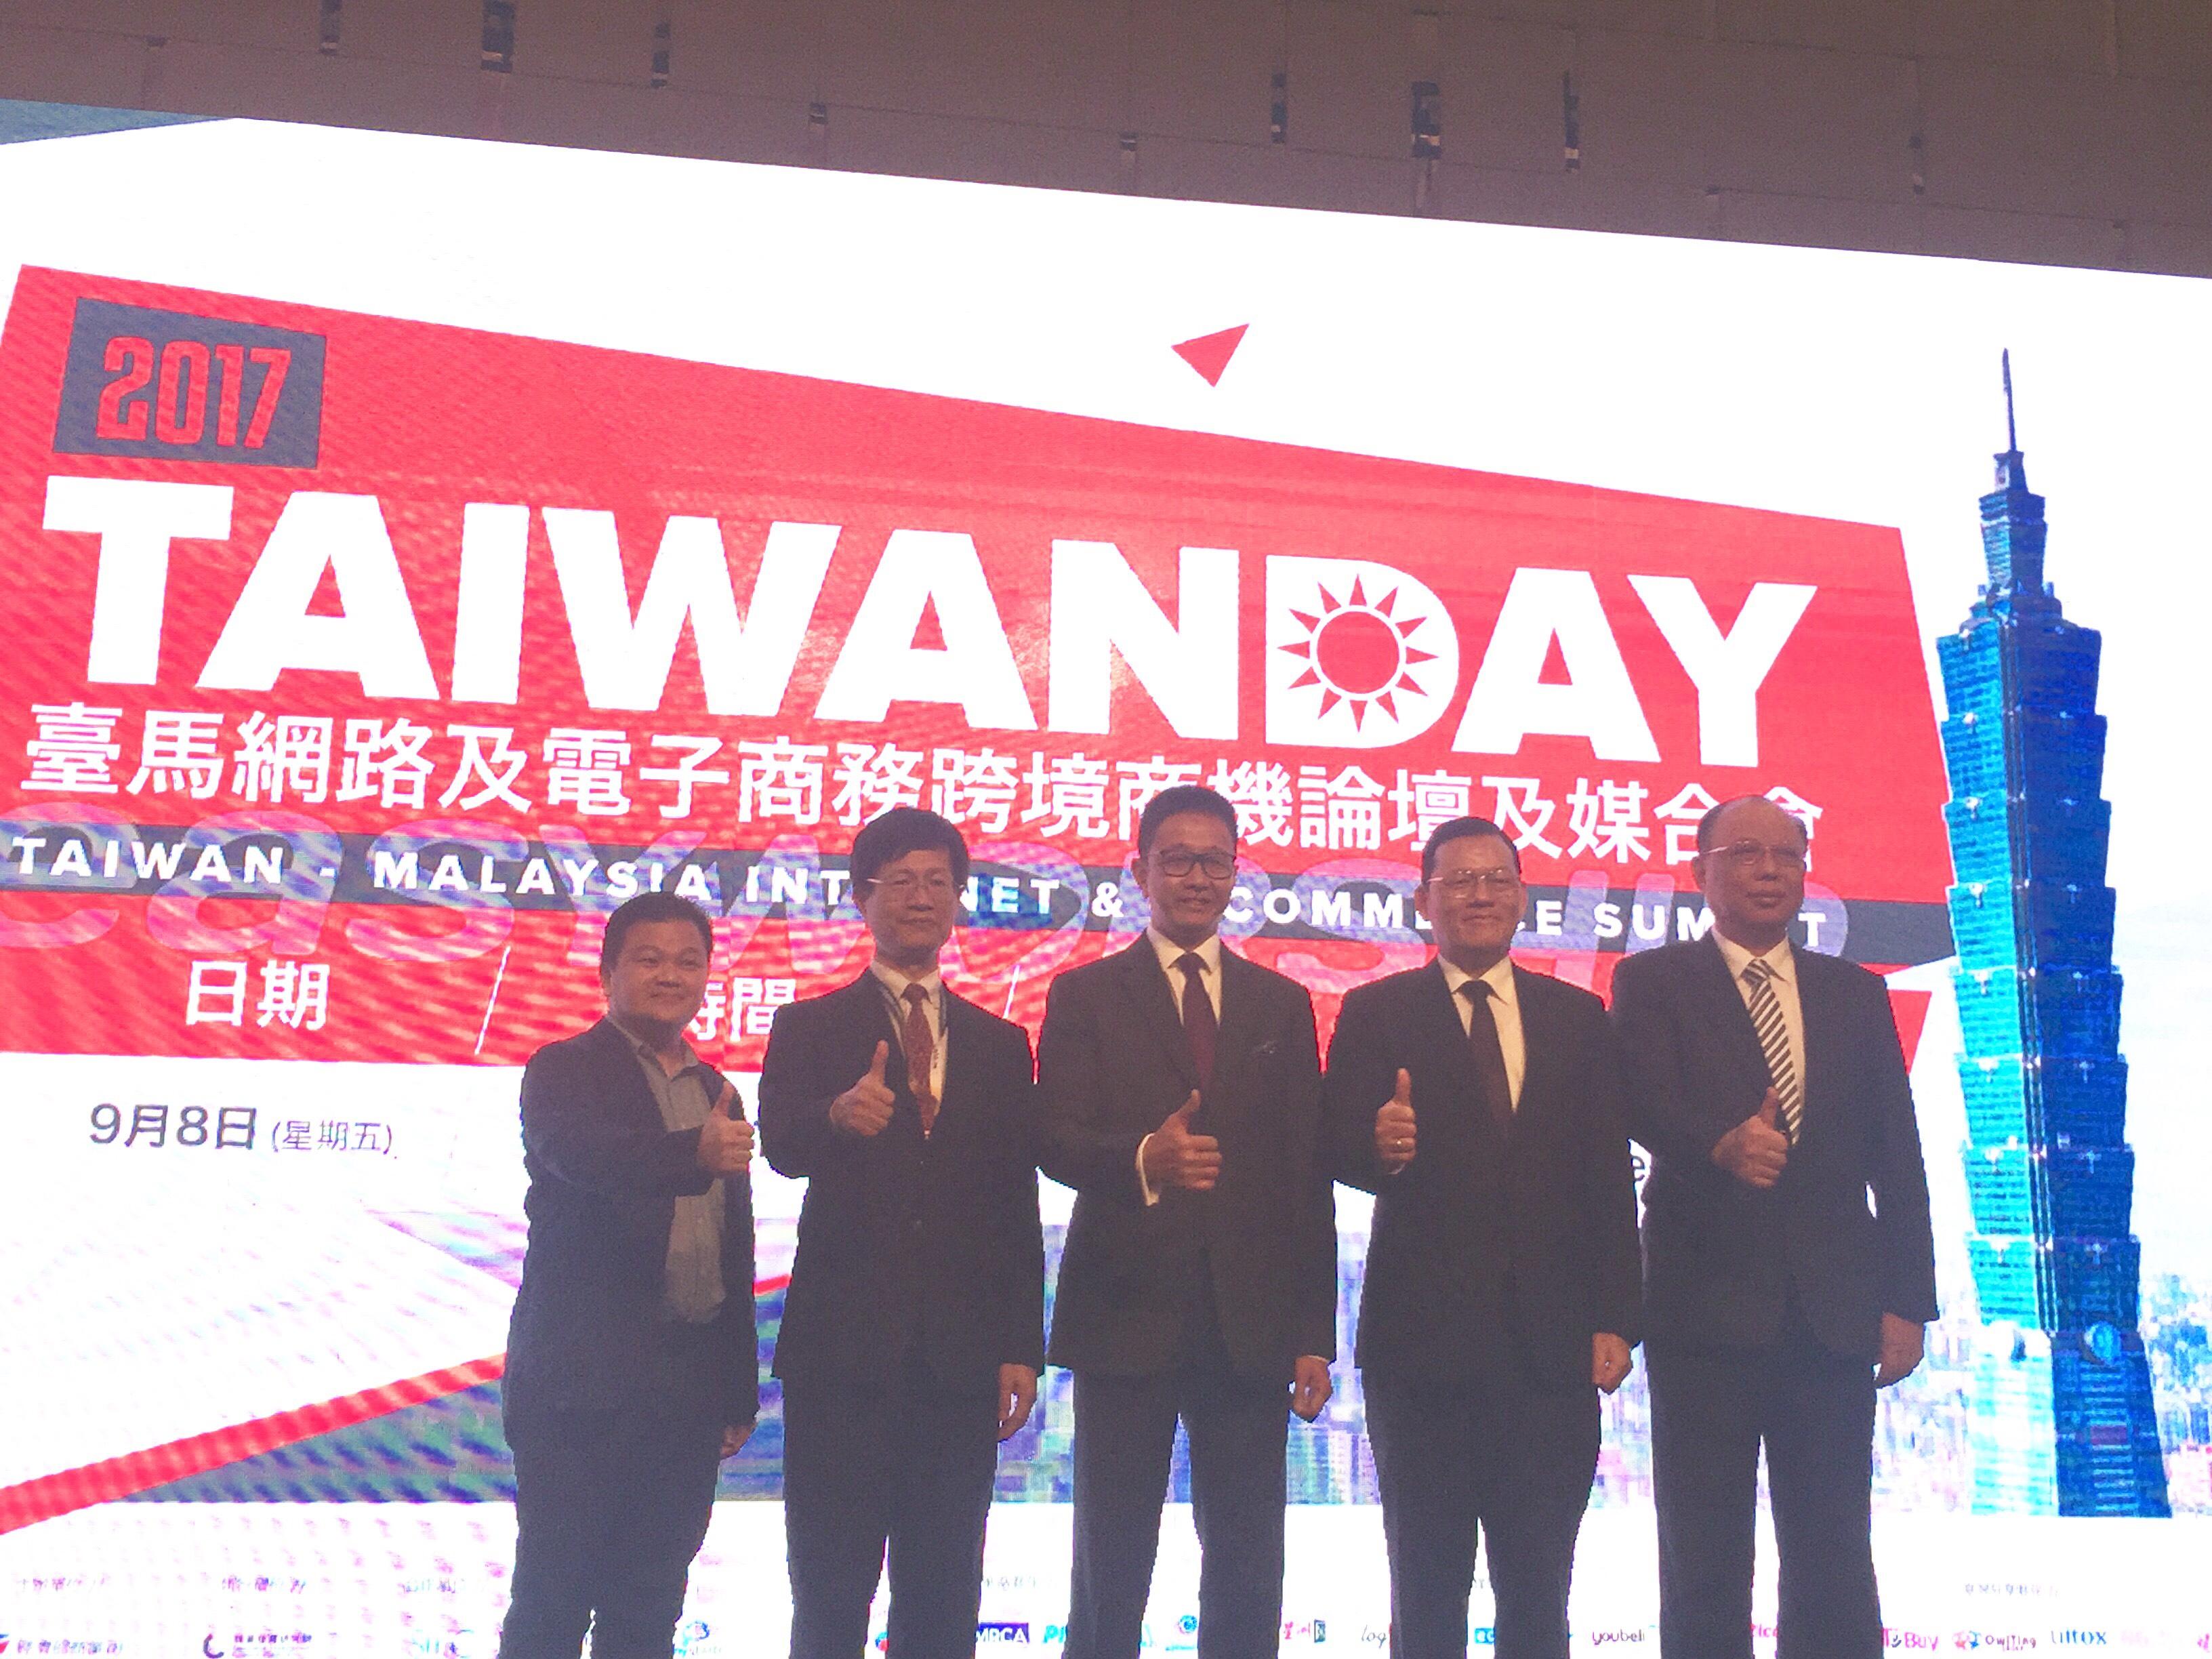 Representative Chang, James Chi-Ping (right 2) attended the “2017 TAIWAN DAY” Opening Ceremony at Setia City Convention Center on 8 September, 2017.
